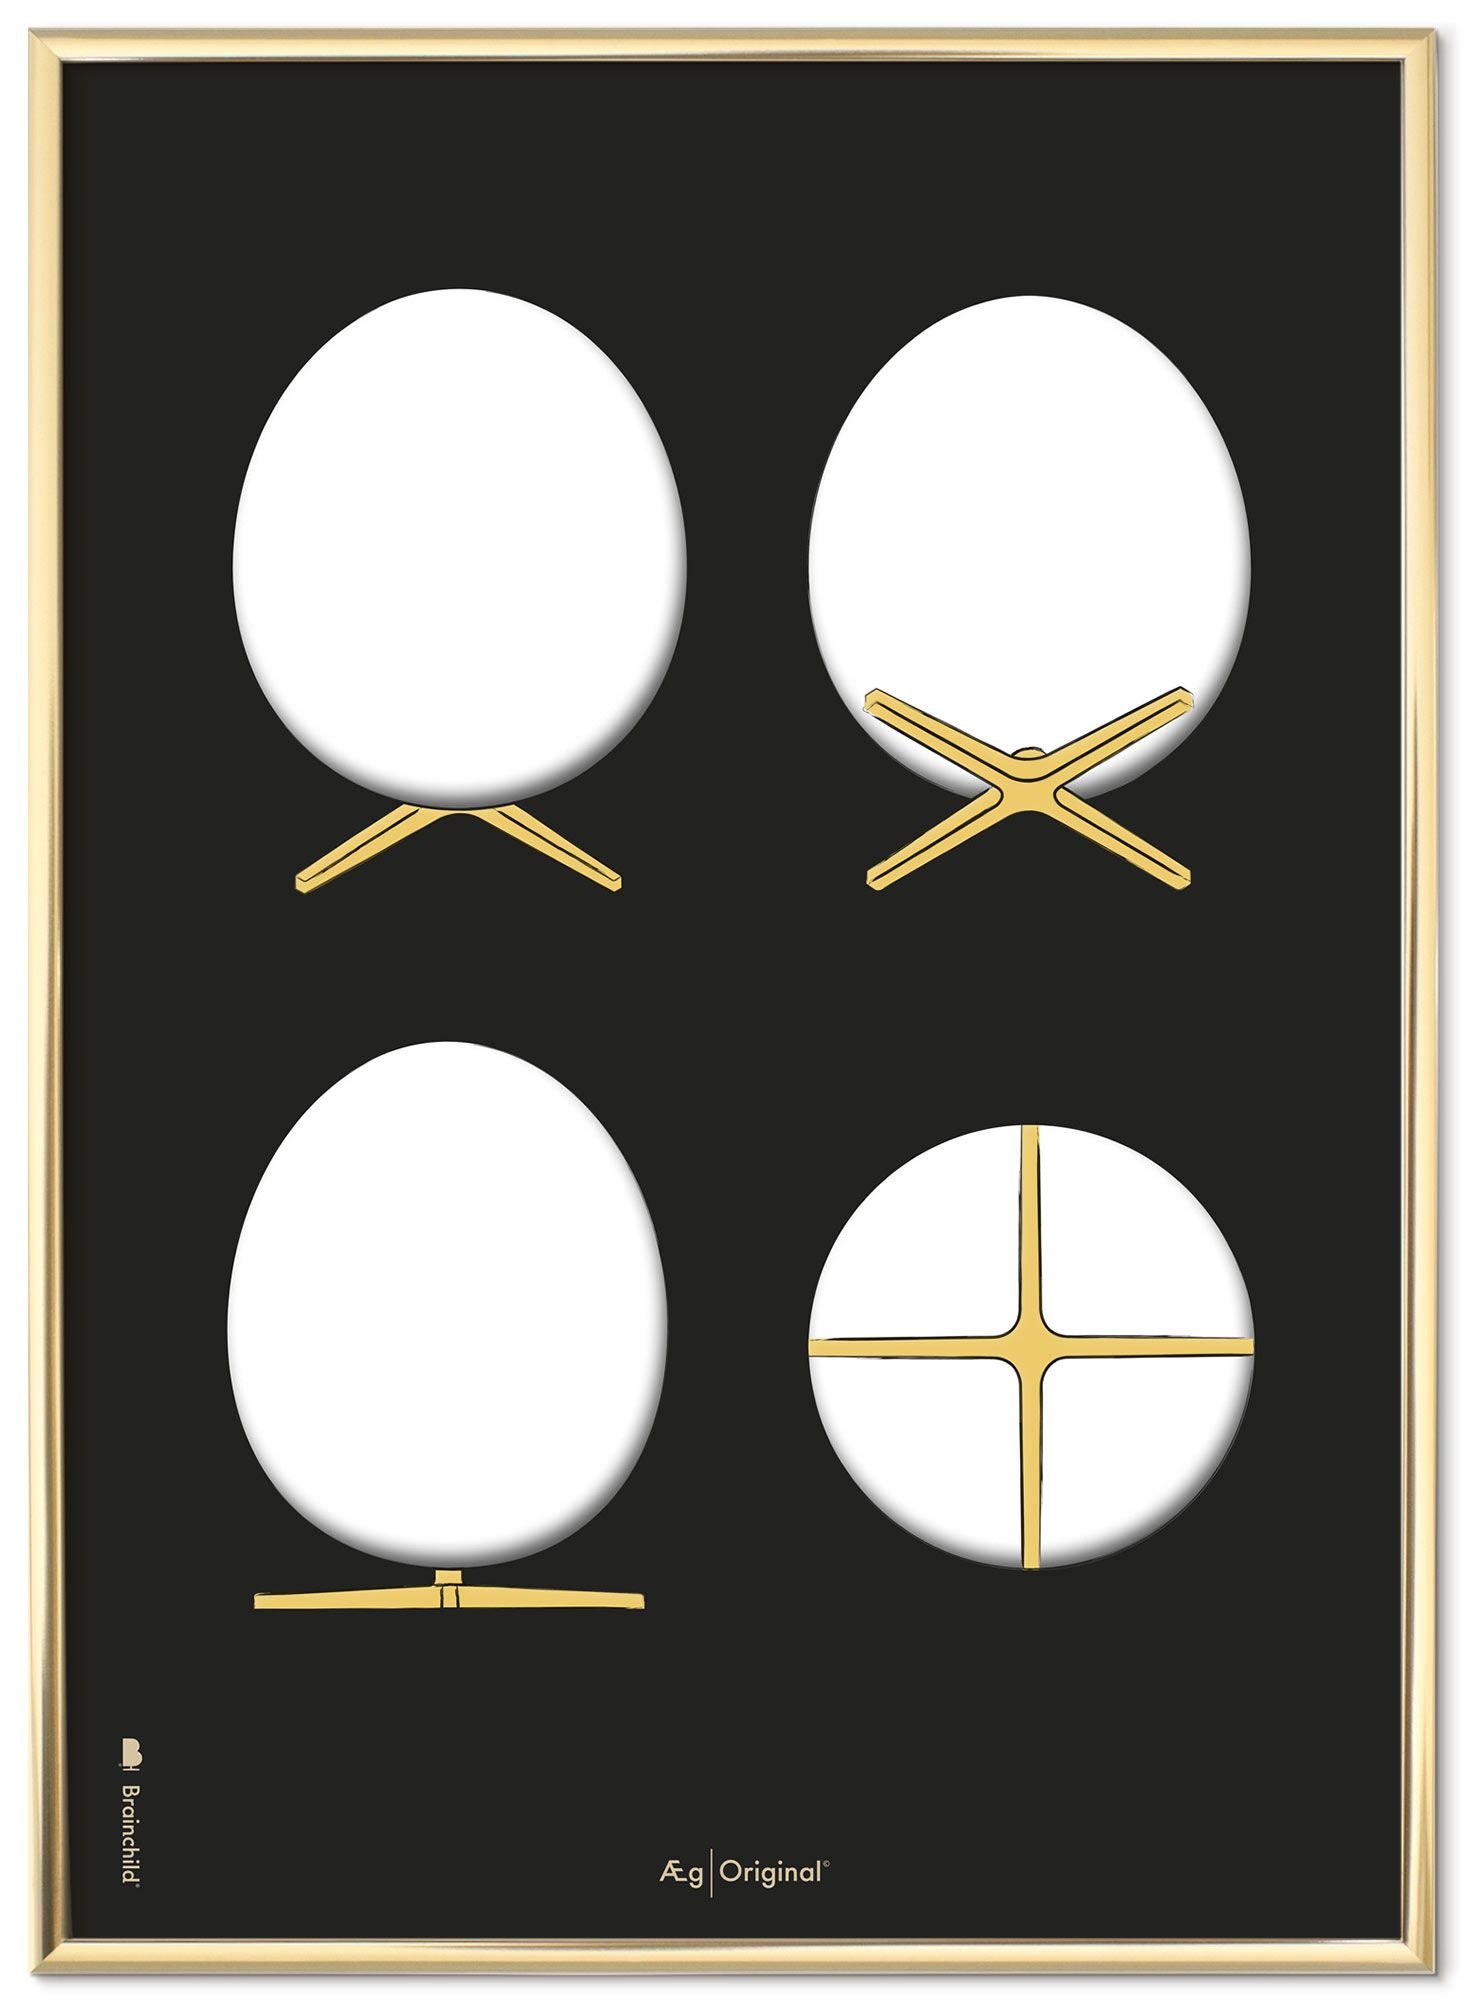 Brainchild The Egg Design Sketches Poster Frame Made Of Brass Colored Metal 70x100 Cm, Black Background